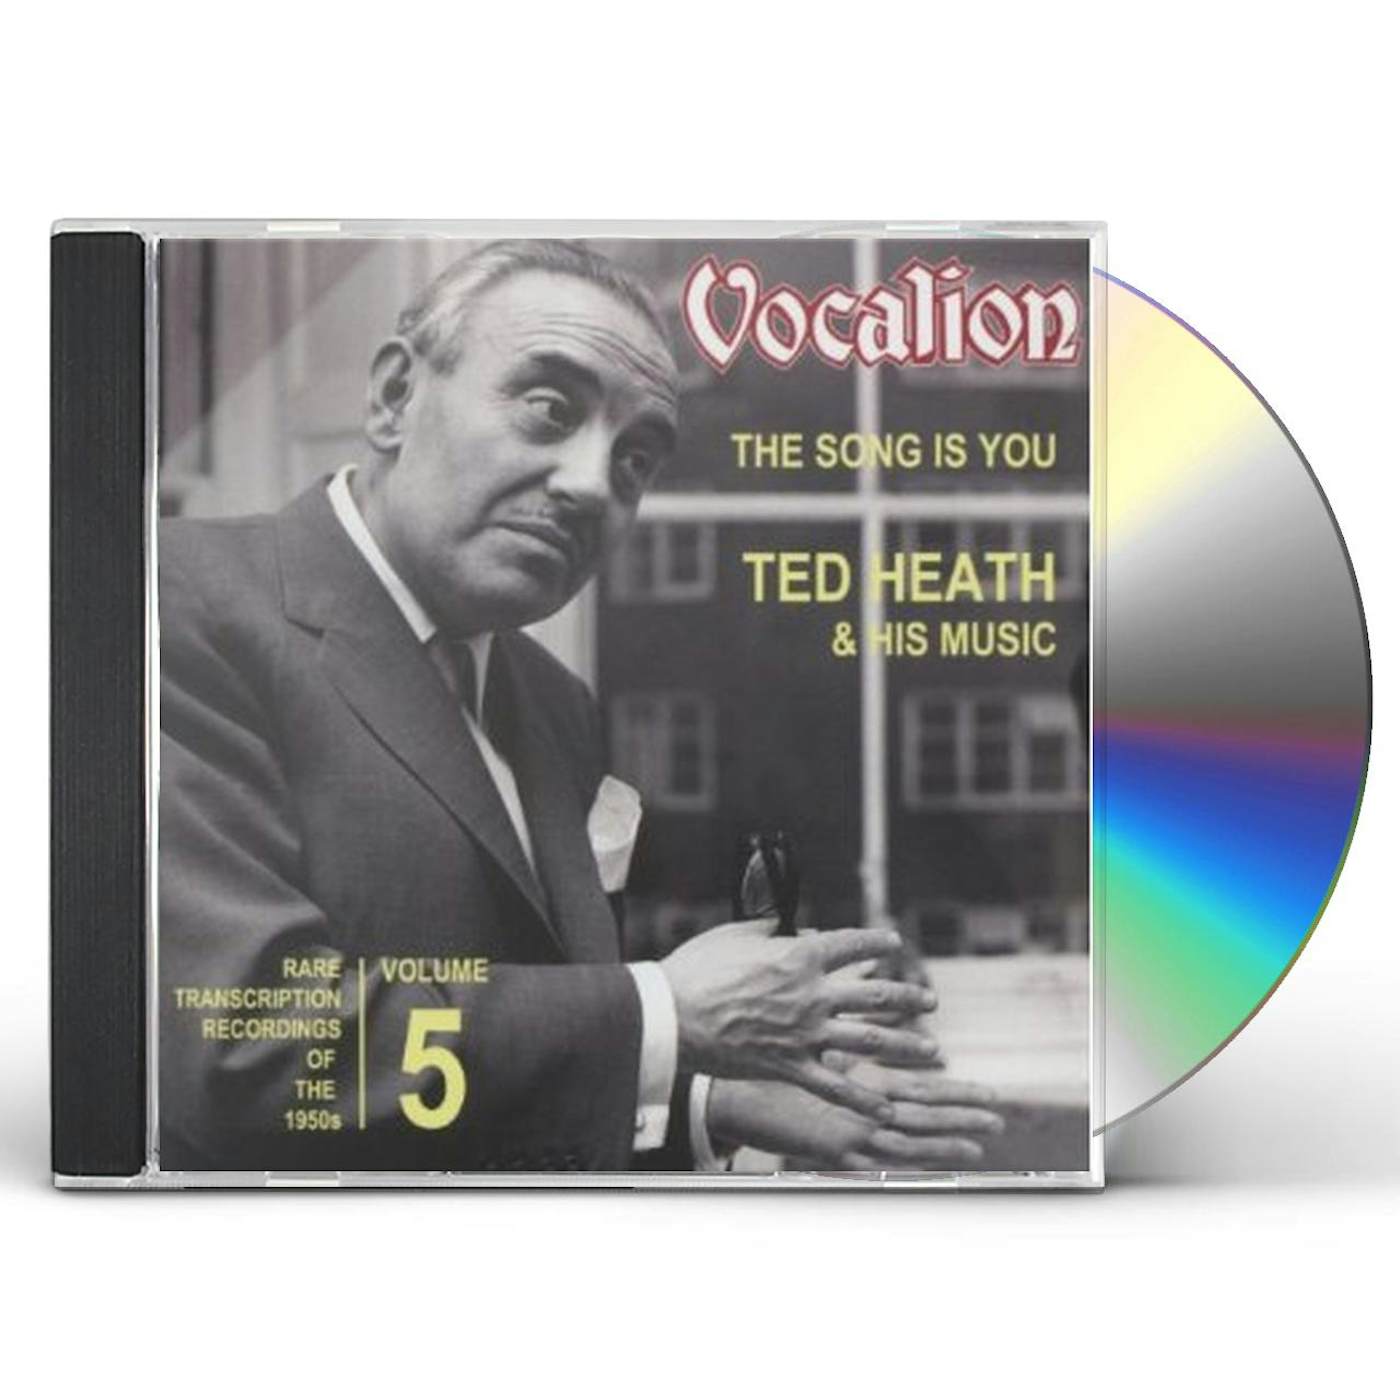 Ted Heath RARE TRANSCRIPTION RECORDINGS OF 1950S: SONG CD